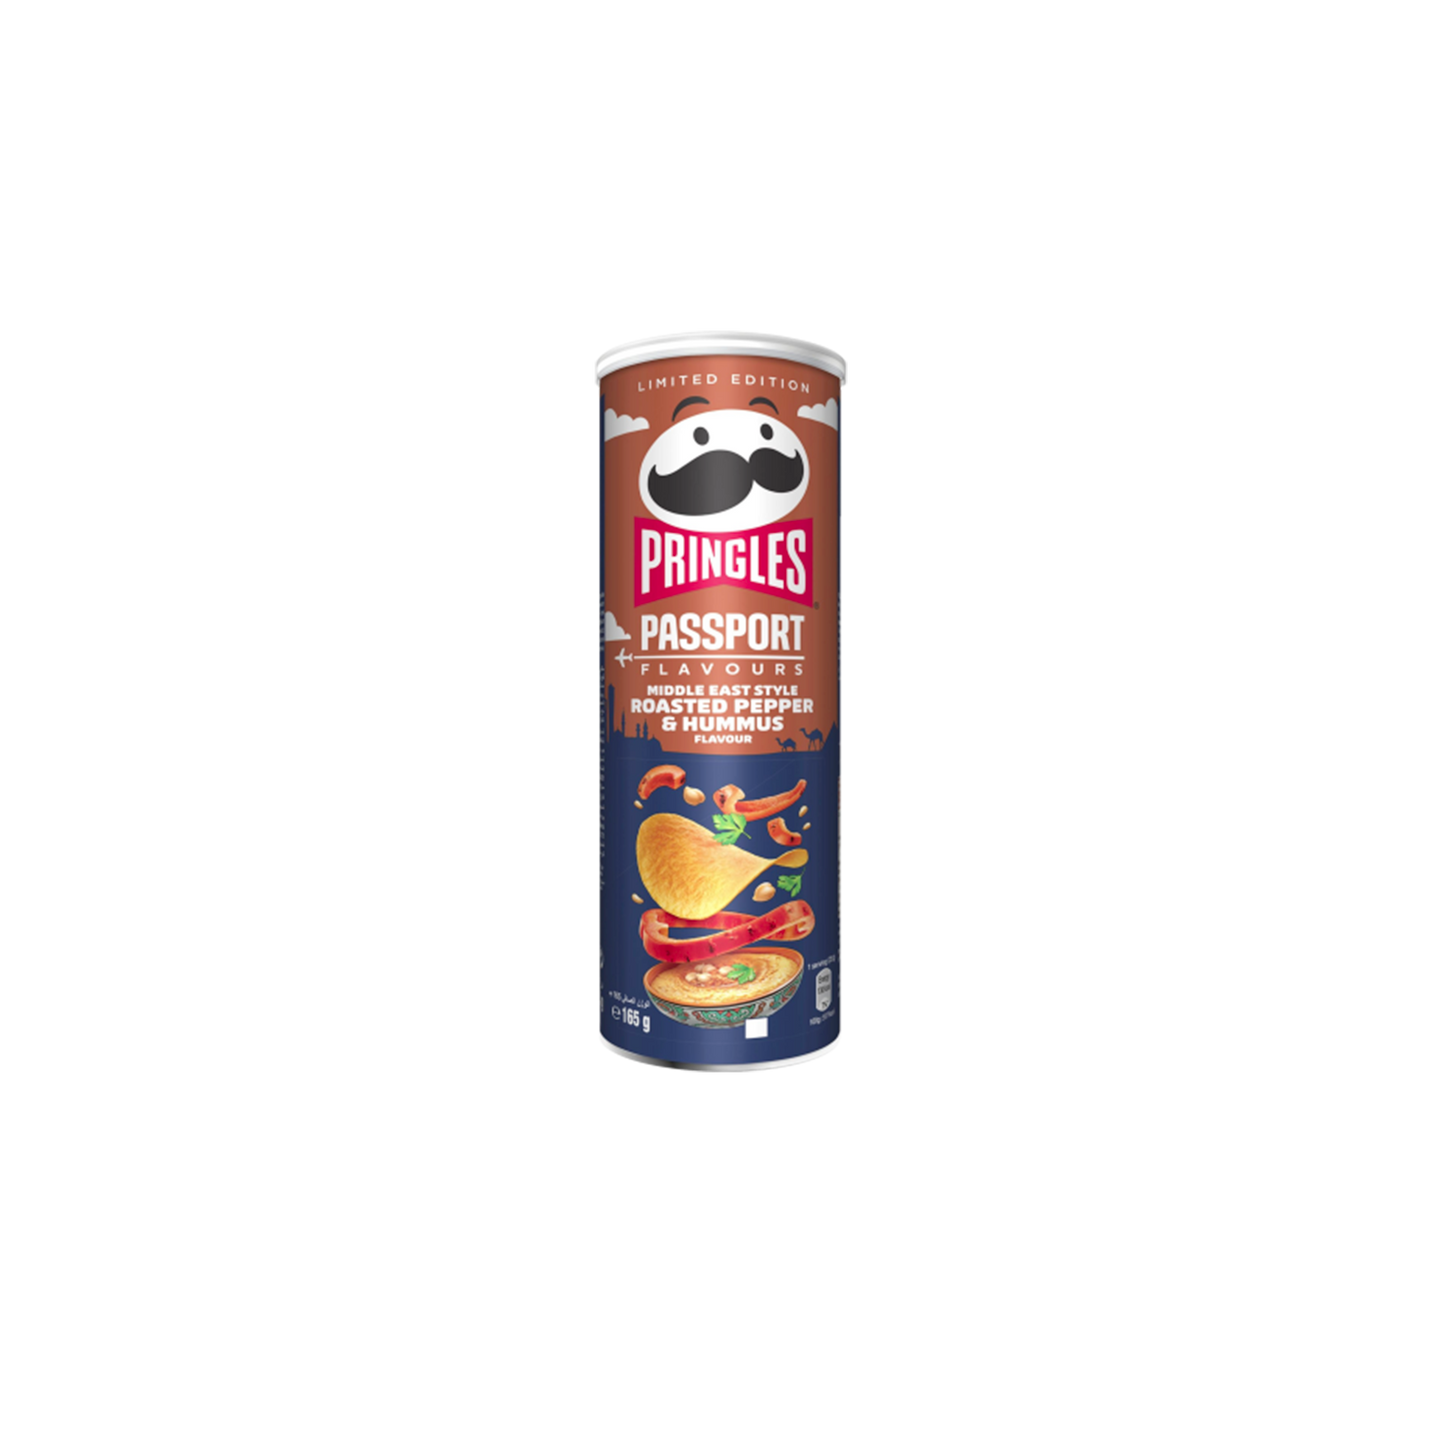 Pringles Passport Middle East Style Roasted Pepper & Hummus 185g